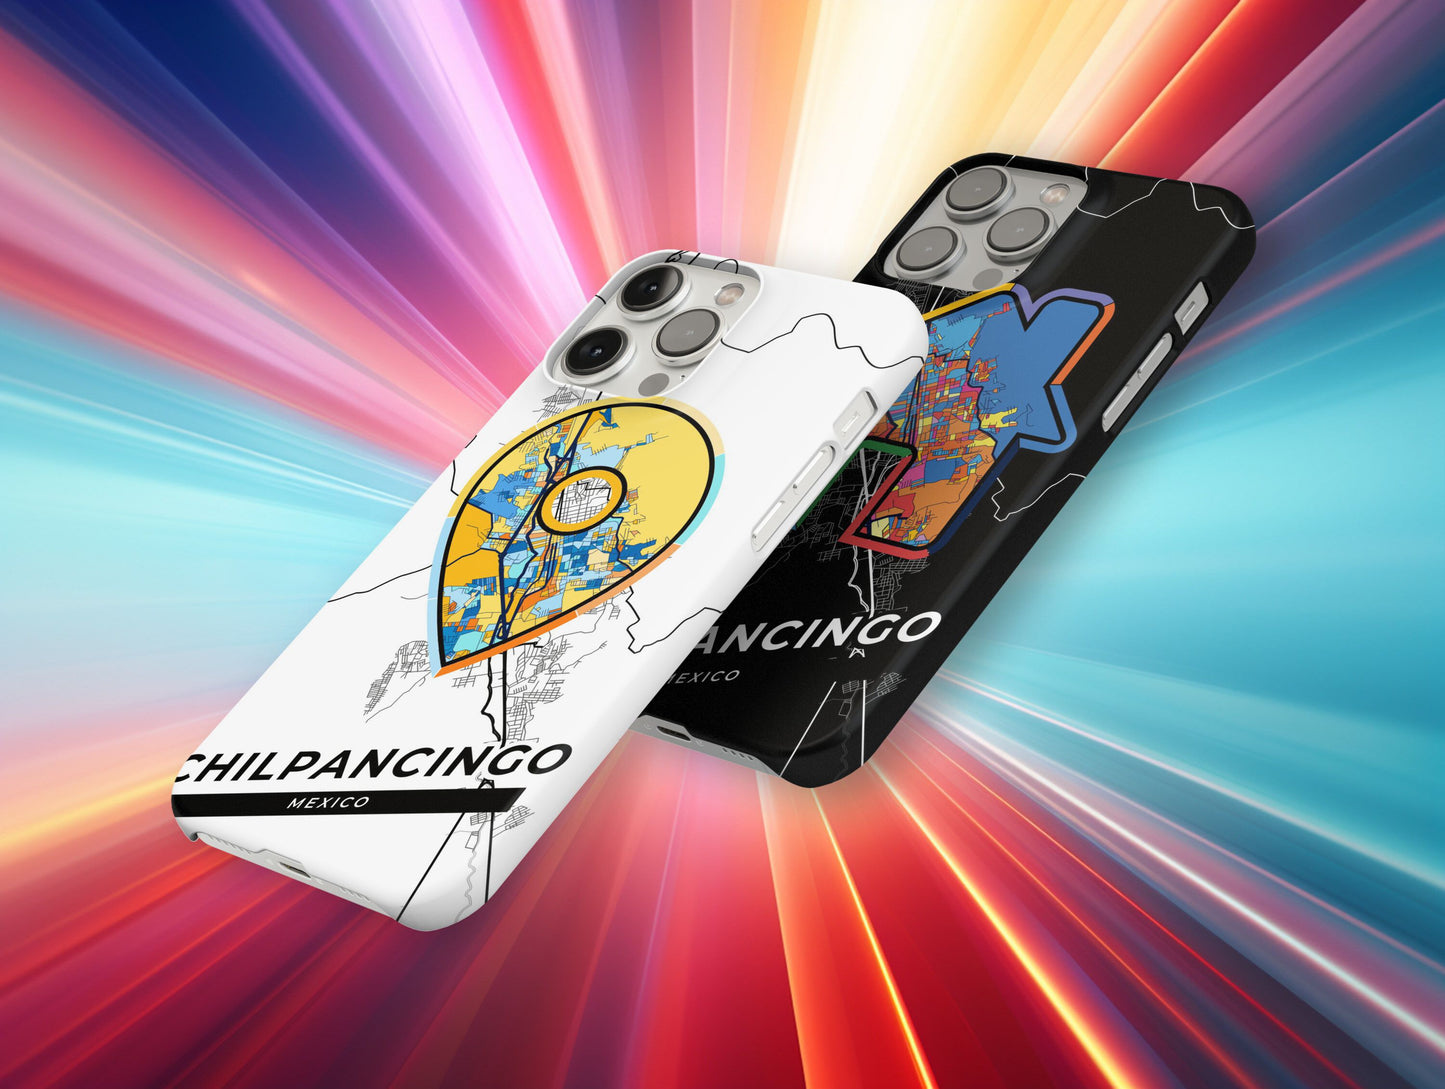 Chilpancingo Mexico slim phone case with colorful icon. Birthday, wedding or housewarming gift. Couple match cases.